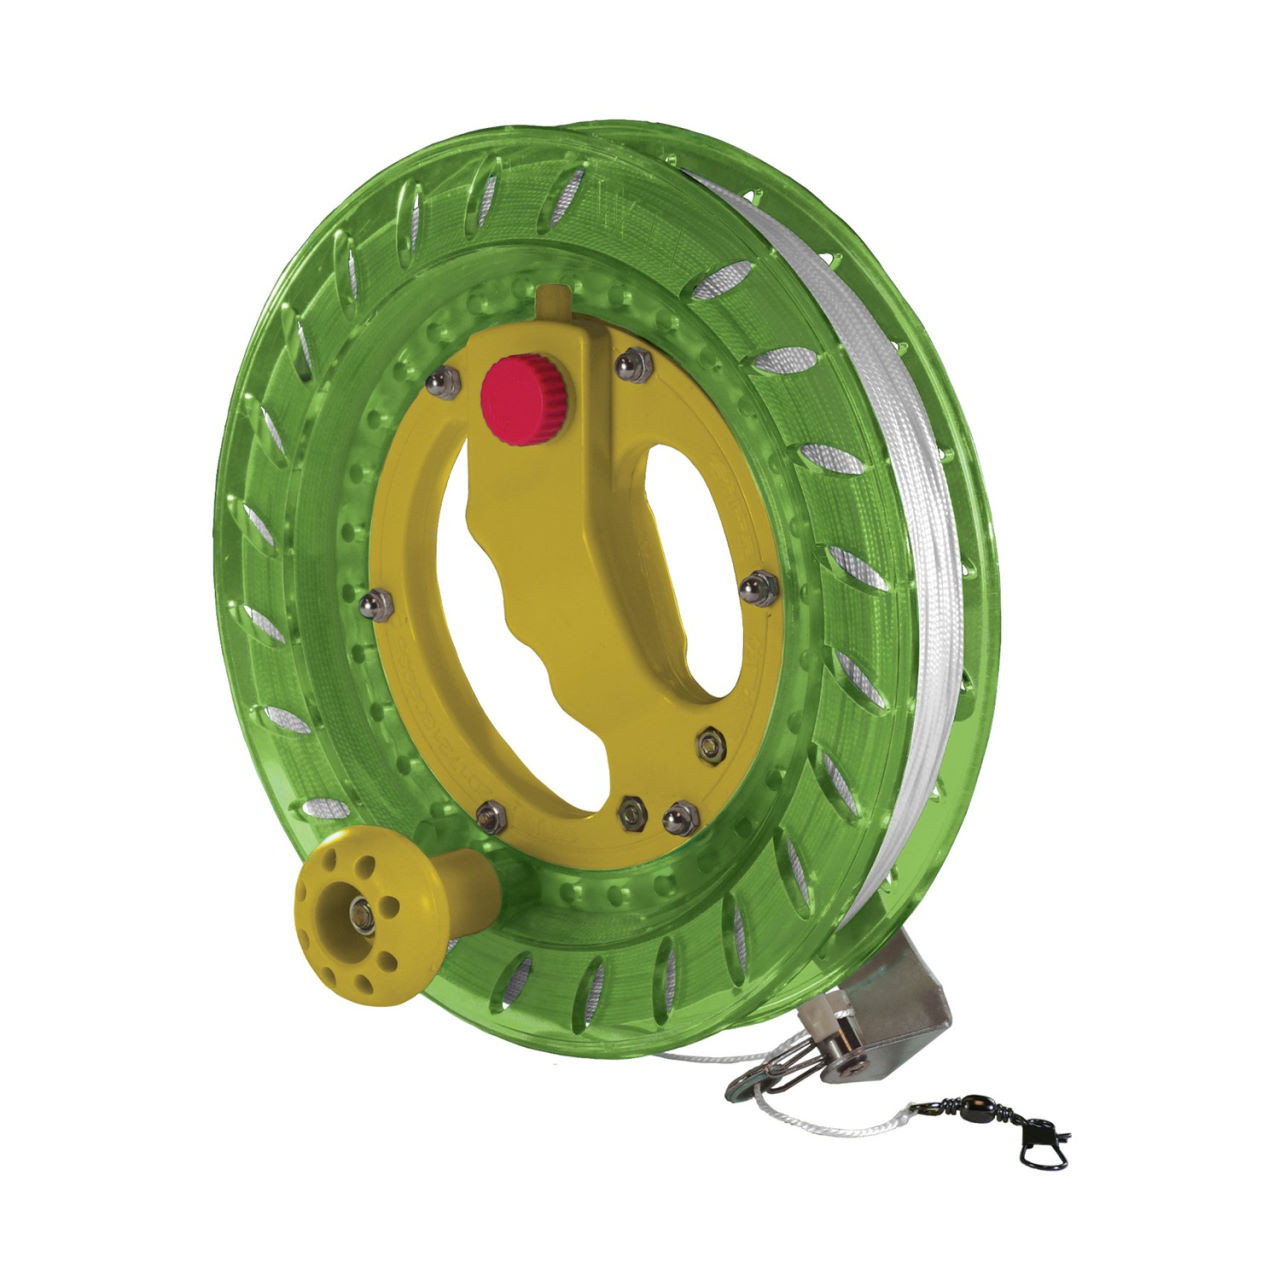 https://cdn11.bigcommerce.com/s-pqt7n8/images/stencil/1280x1280/products/13013/42154/in-the-breeze-50lb-640ft-8in-kite-reel-winder-green1__35237.1704467292.jpg?c=2